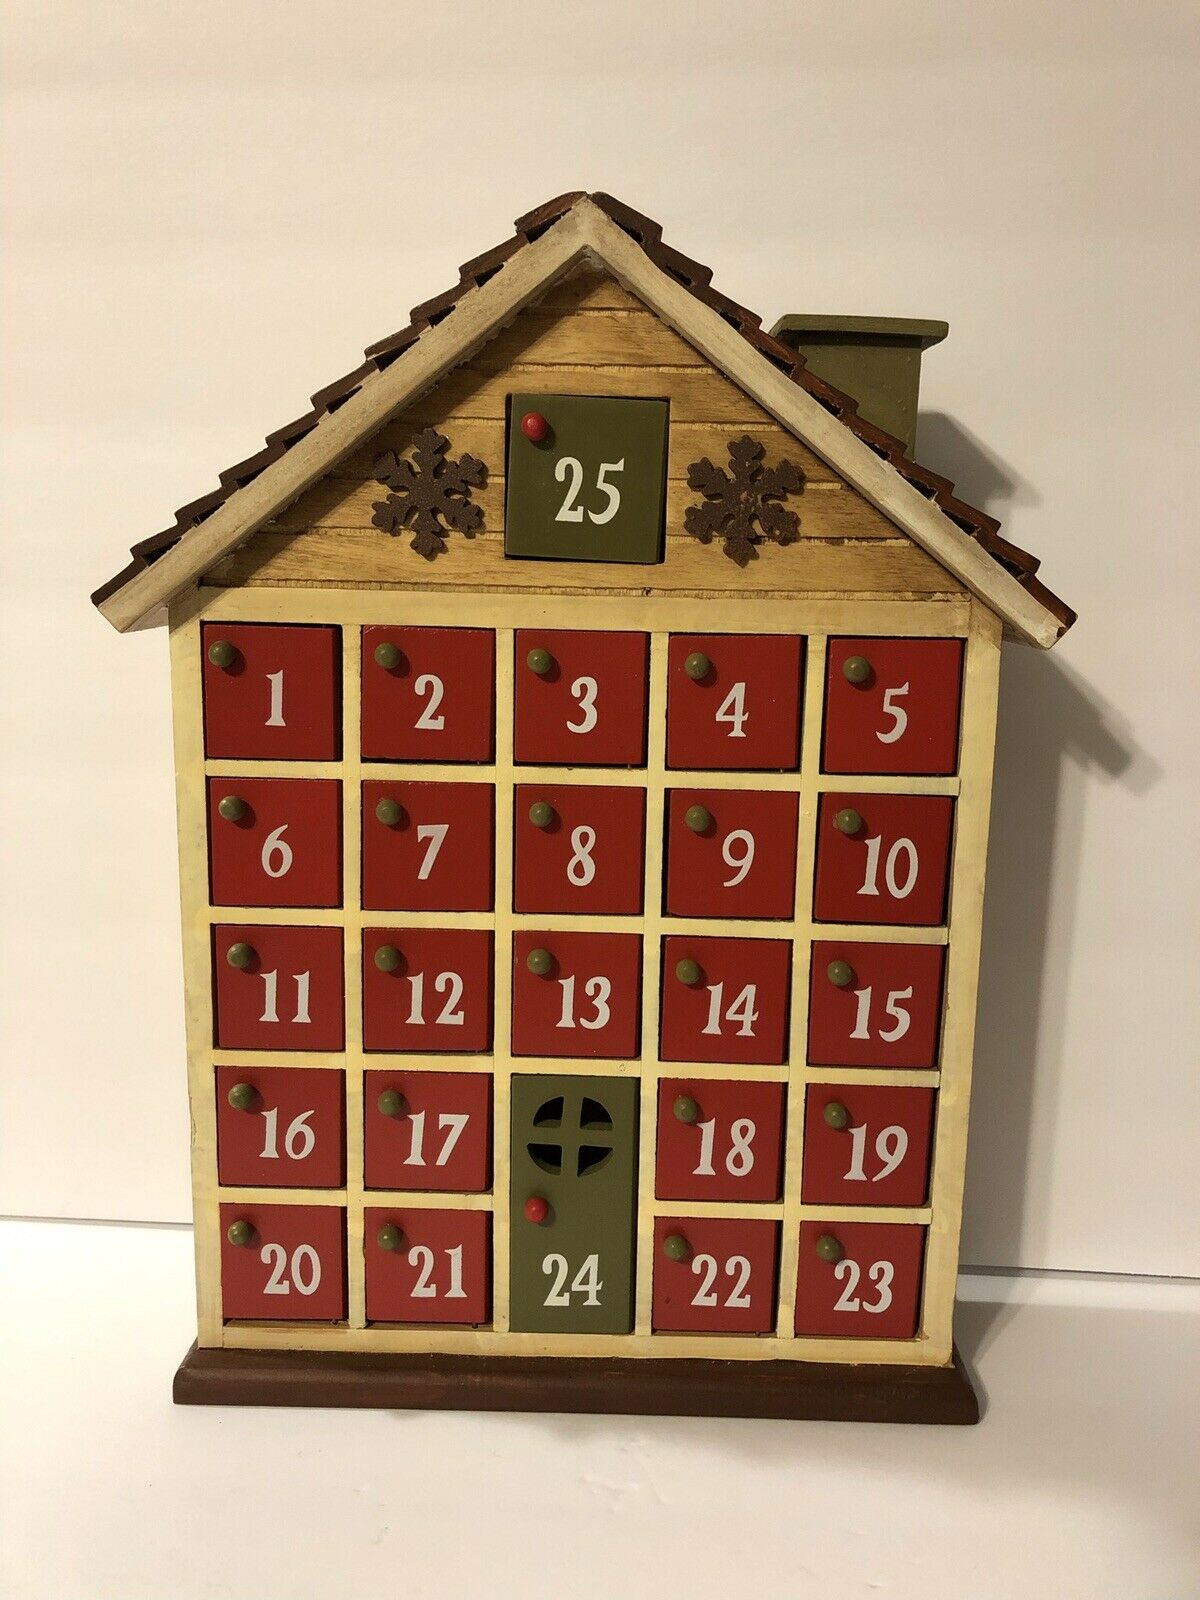 Advent Calendar Wooden Christmas House With 25 Doors Countdown Holiday Decor